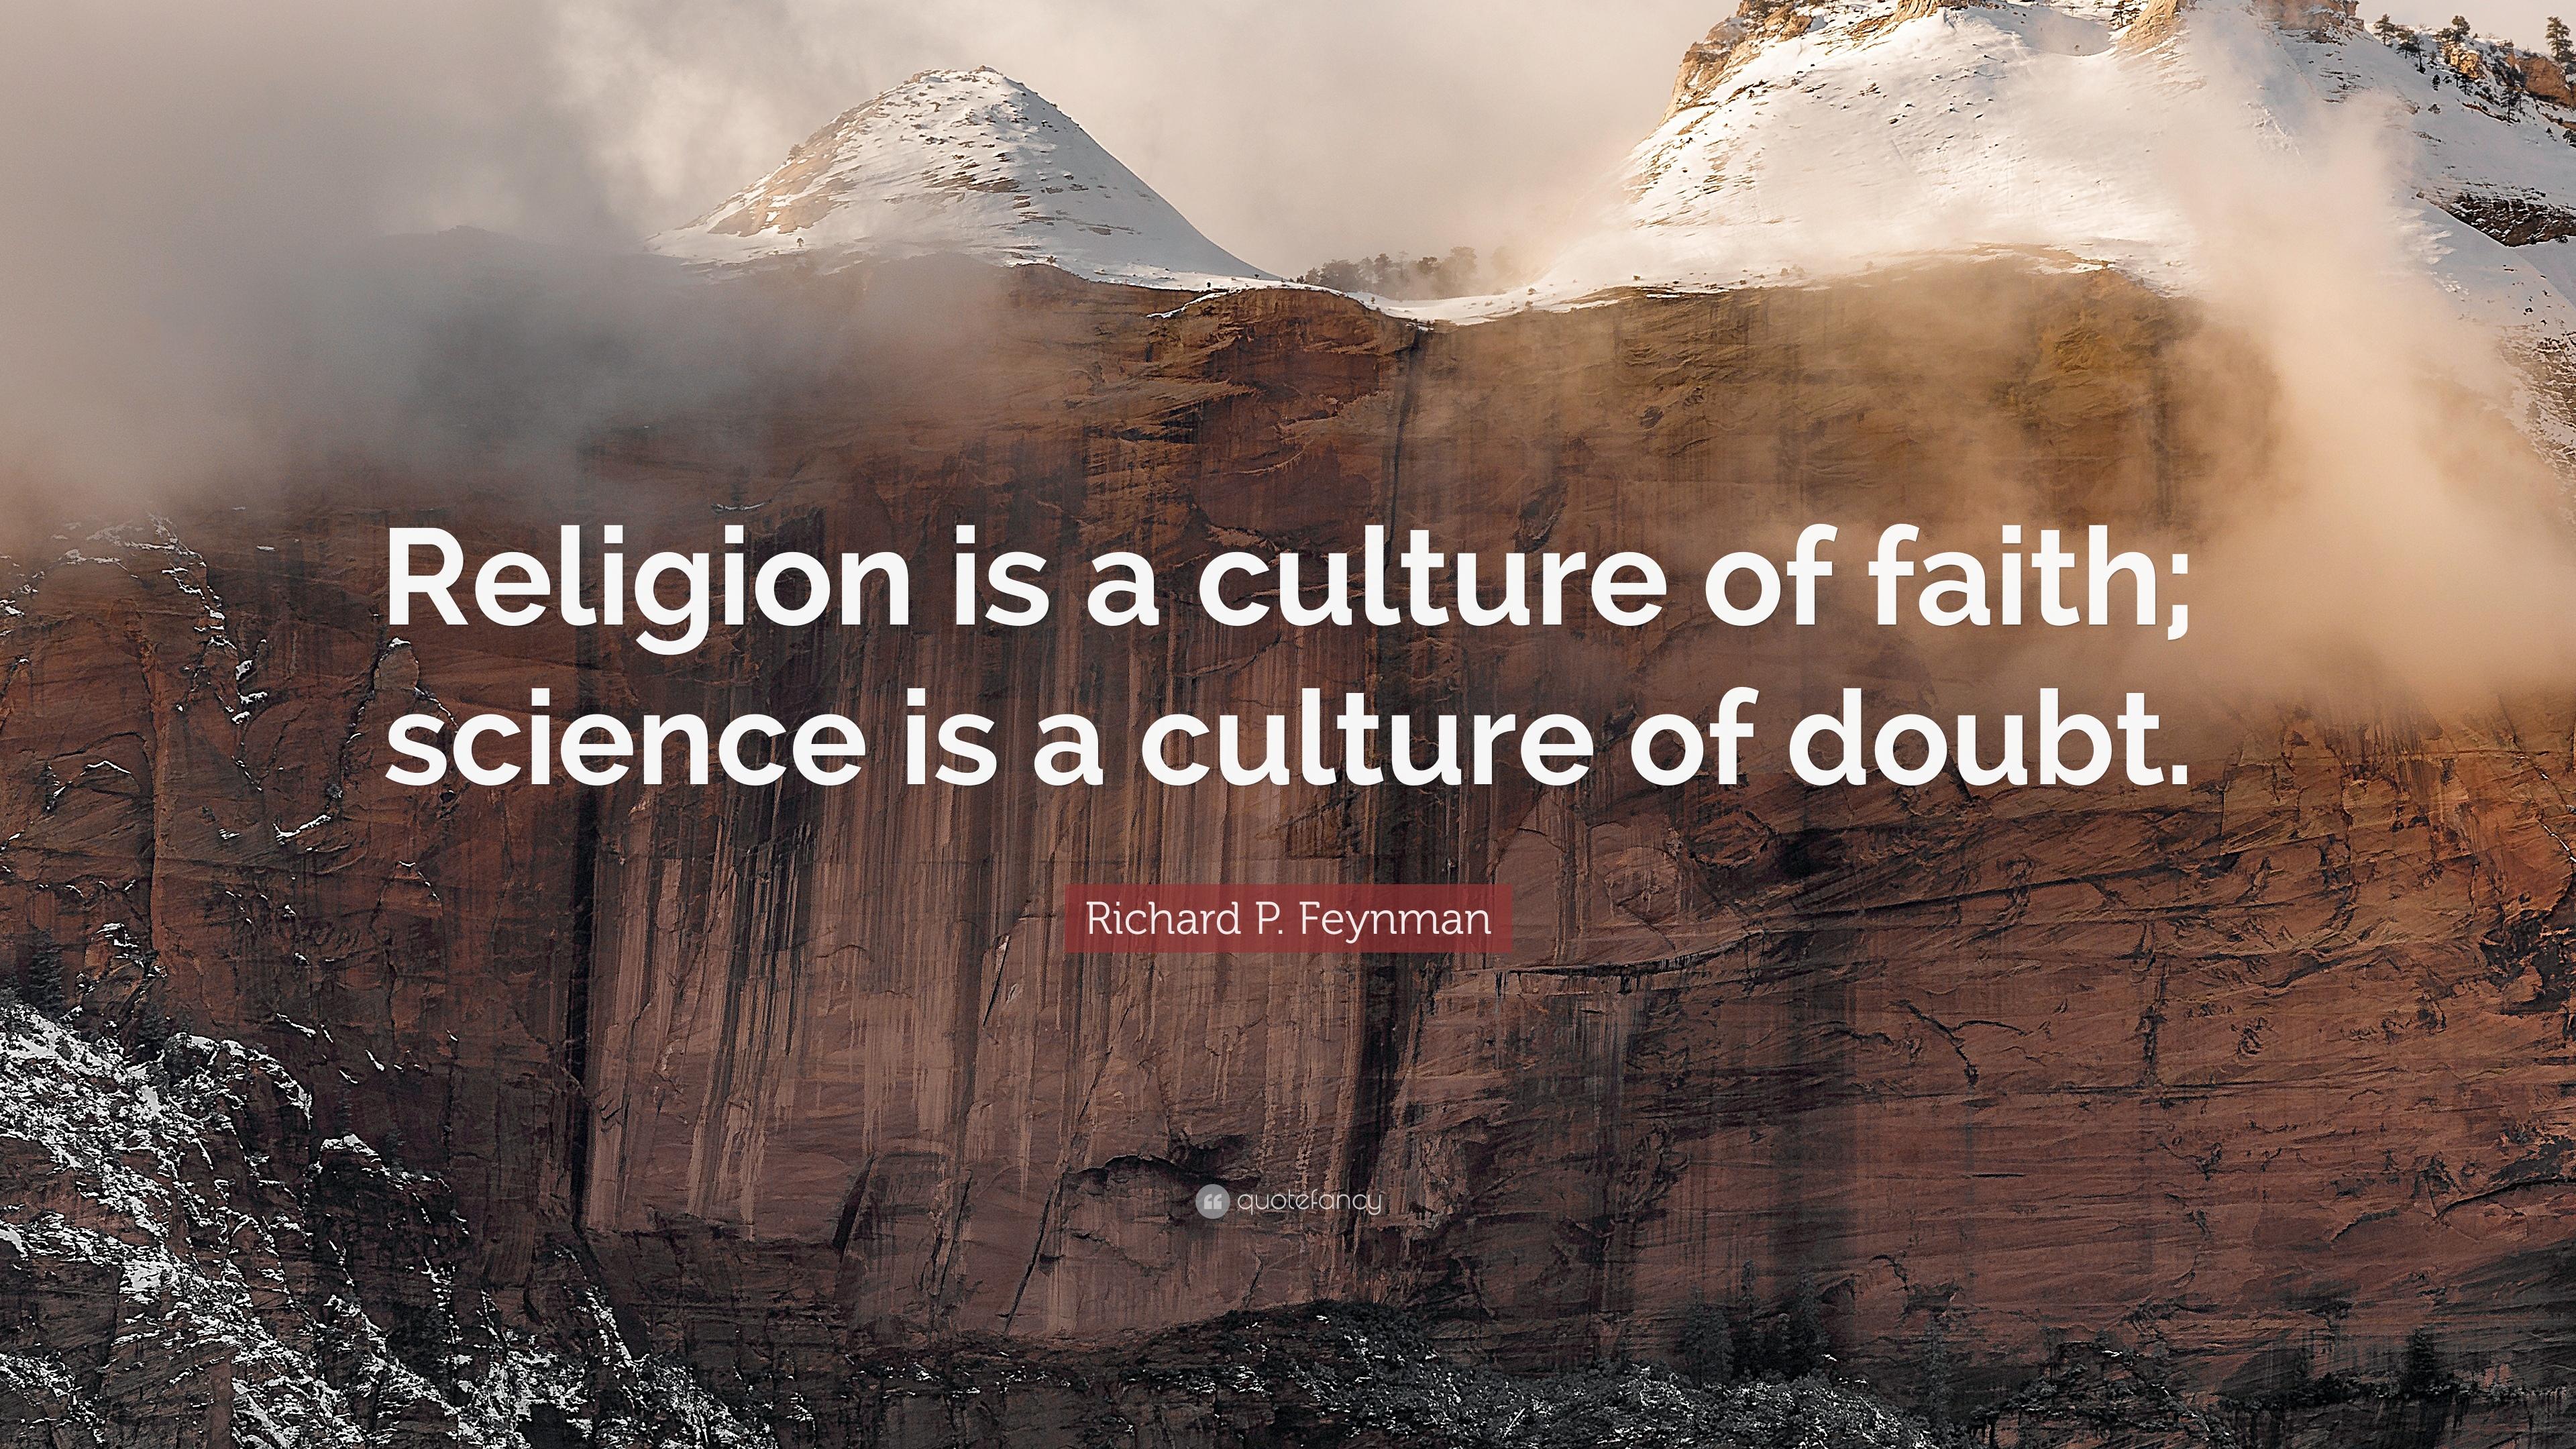 Richard P. Feynman Quote: “Religion is a culture of faith; science